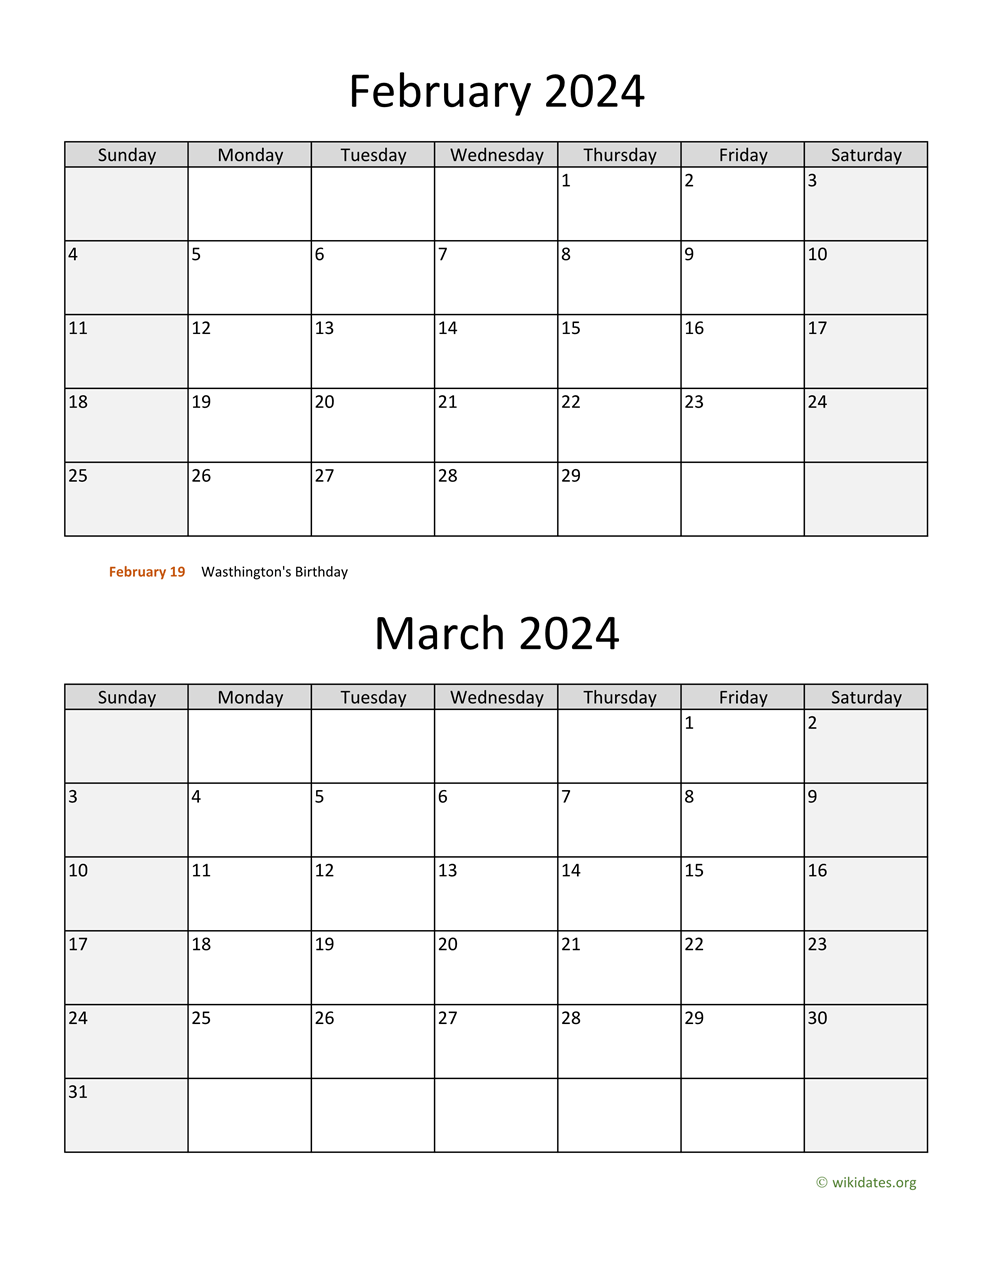 February And March 2024 Calendar | Wikidates for February March Calendar 2024 Printable